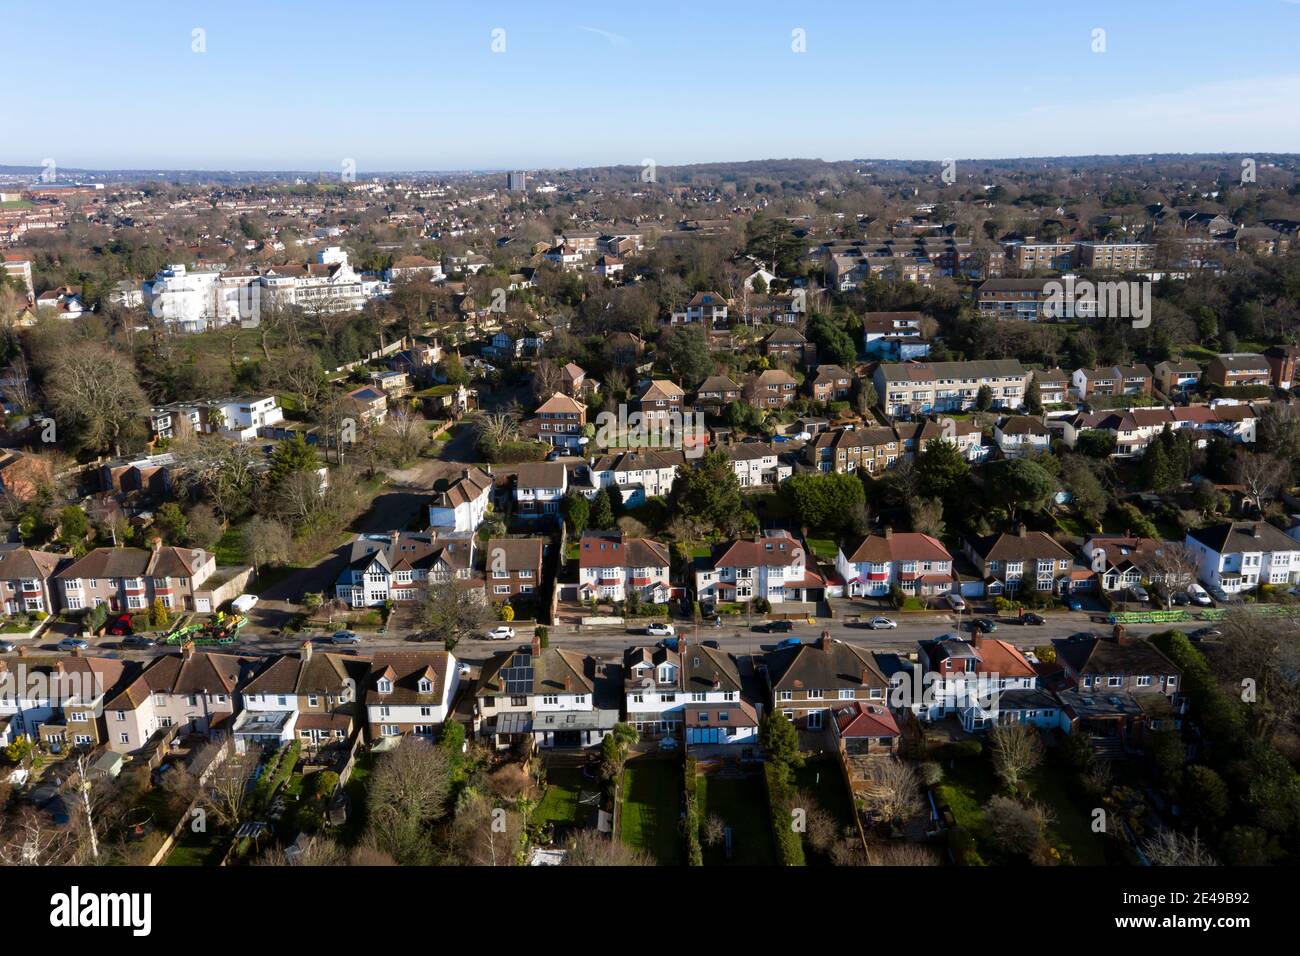 Aerial view looking down on  Warren Avenue, Bromley, South East London, looking towards Sundridge Park Stock Photo